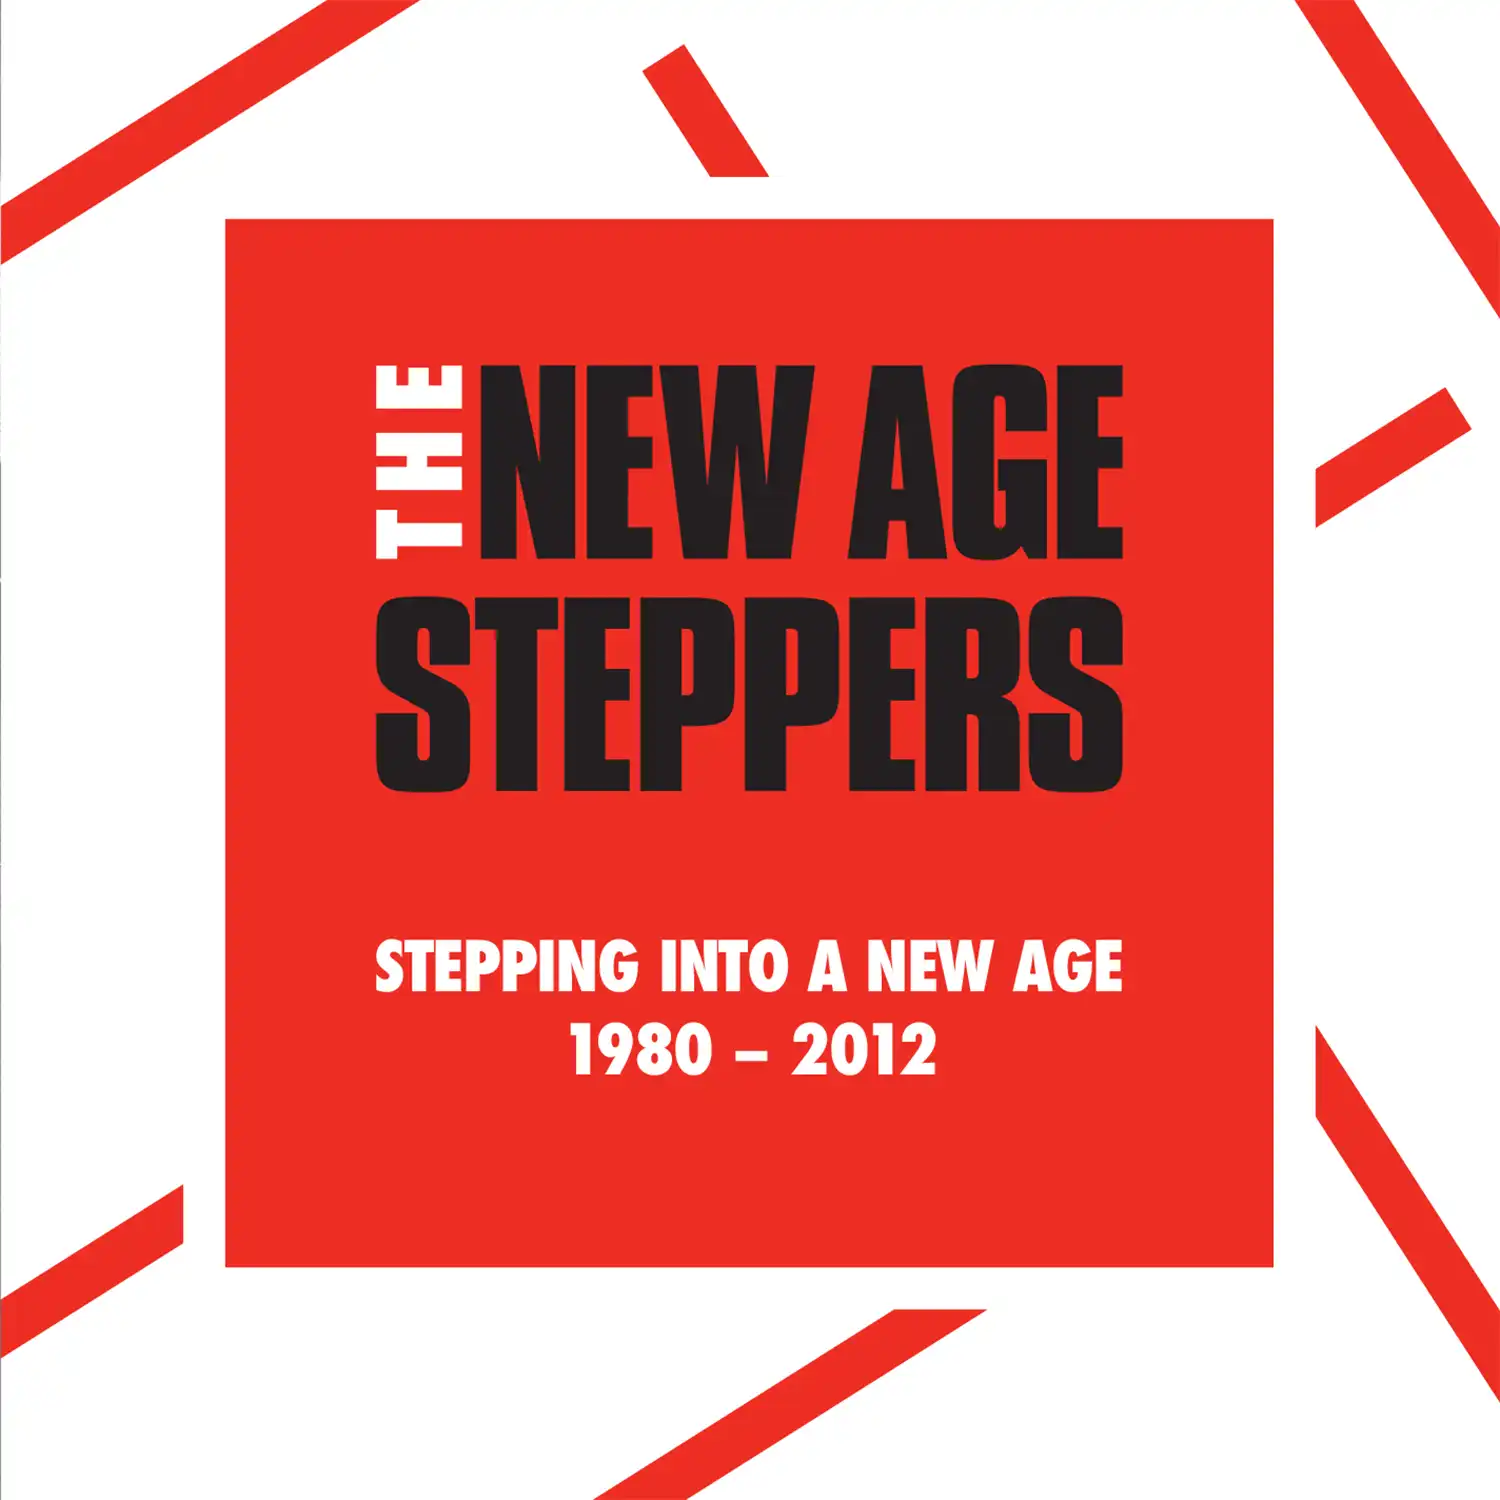 NEW AGE STEPPERS / STEPPING INTO A NEW AGE 1980 - 2012 限定 国内仕様5CD(BOX)+Tシャツ(L)  